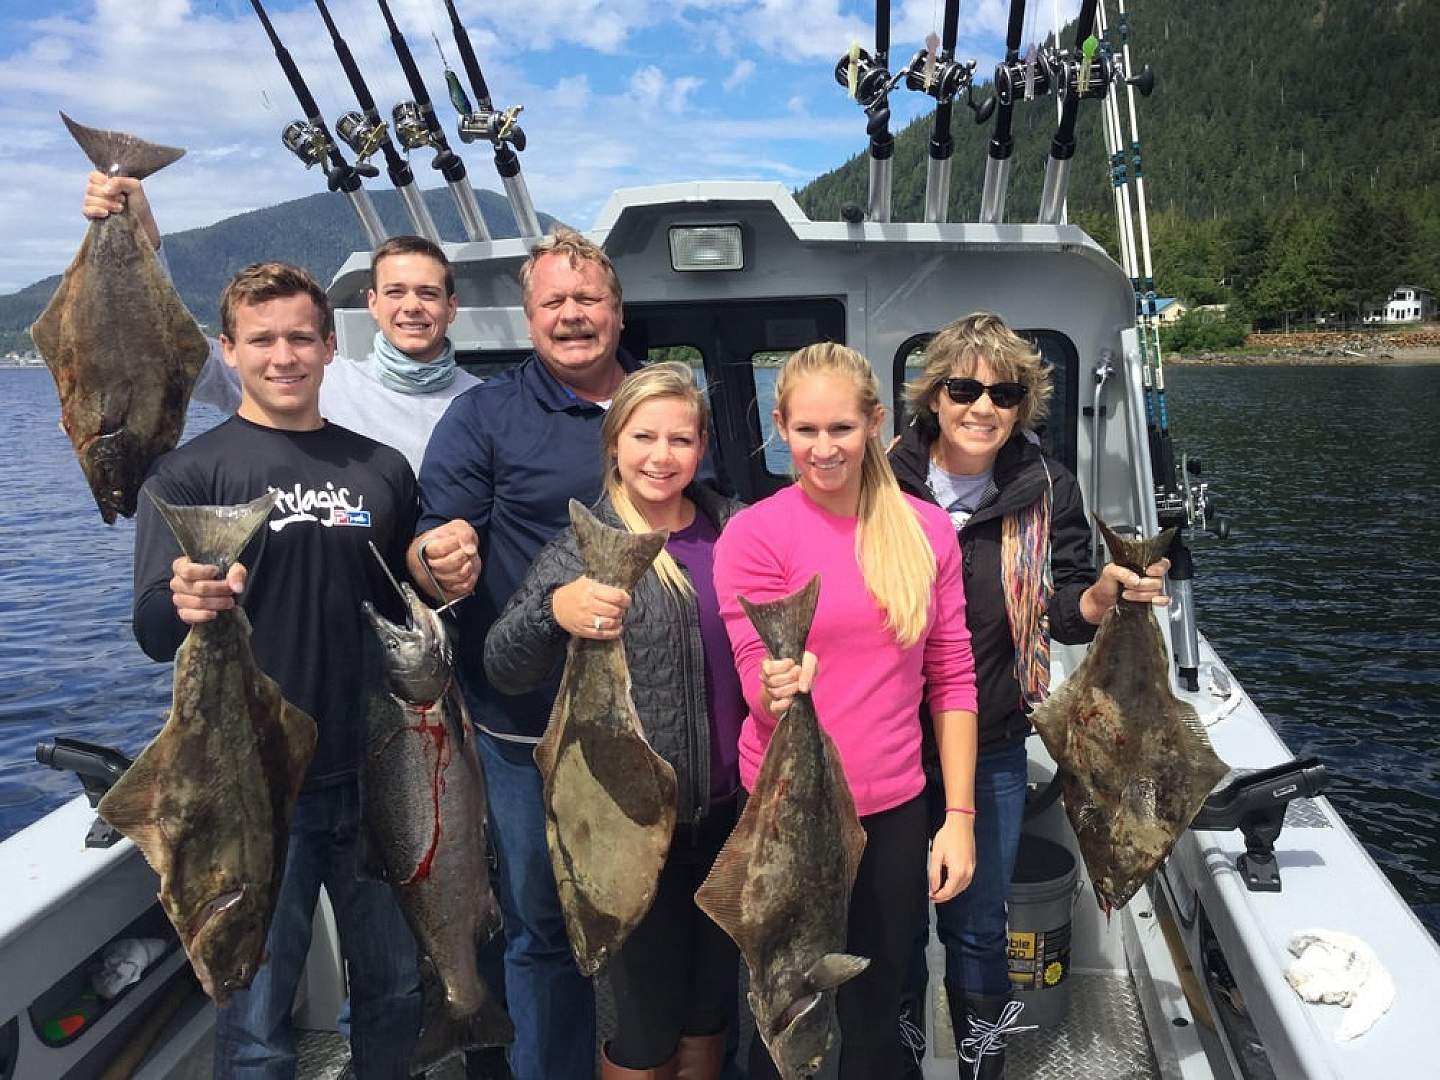 Fishing Charters in Ketchikan operate May til September with trips starting at 2 hours